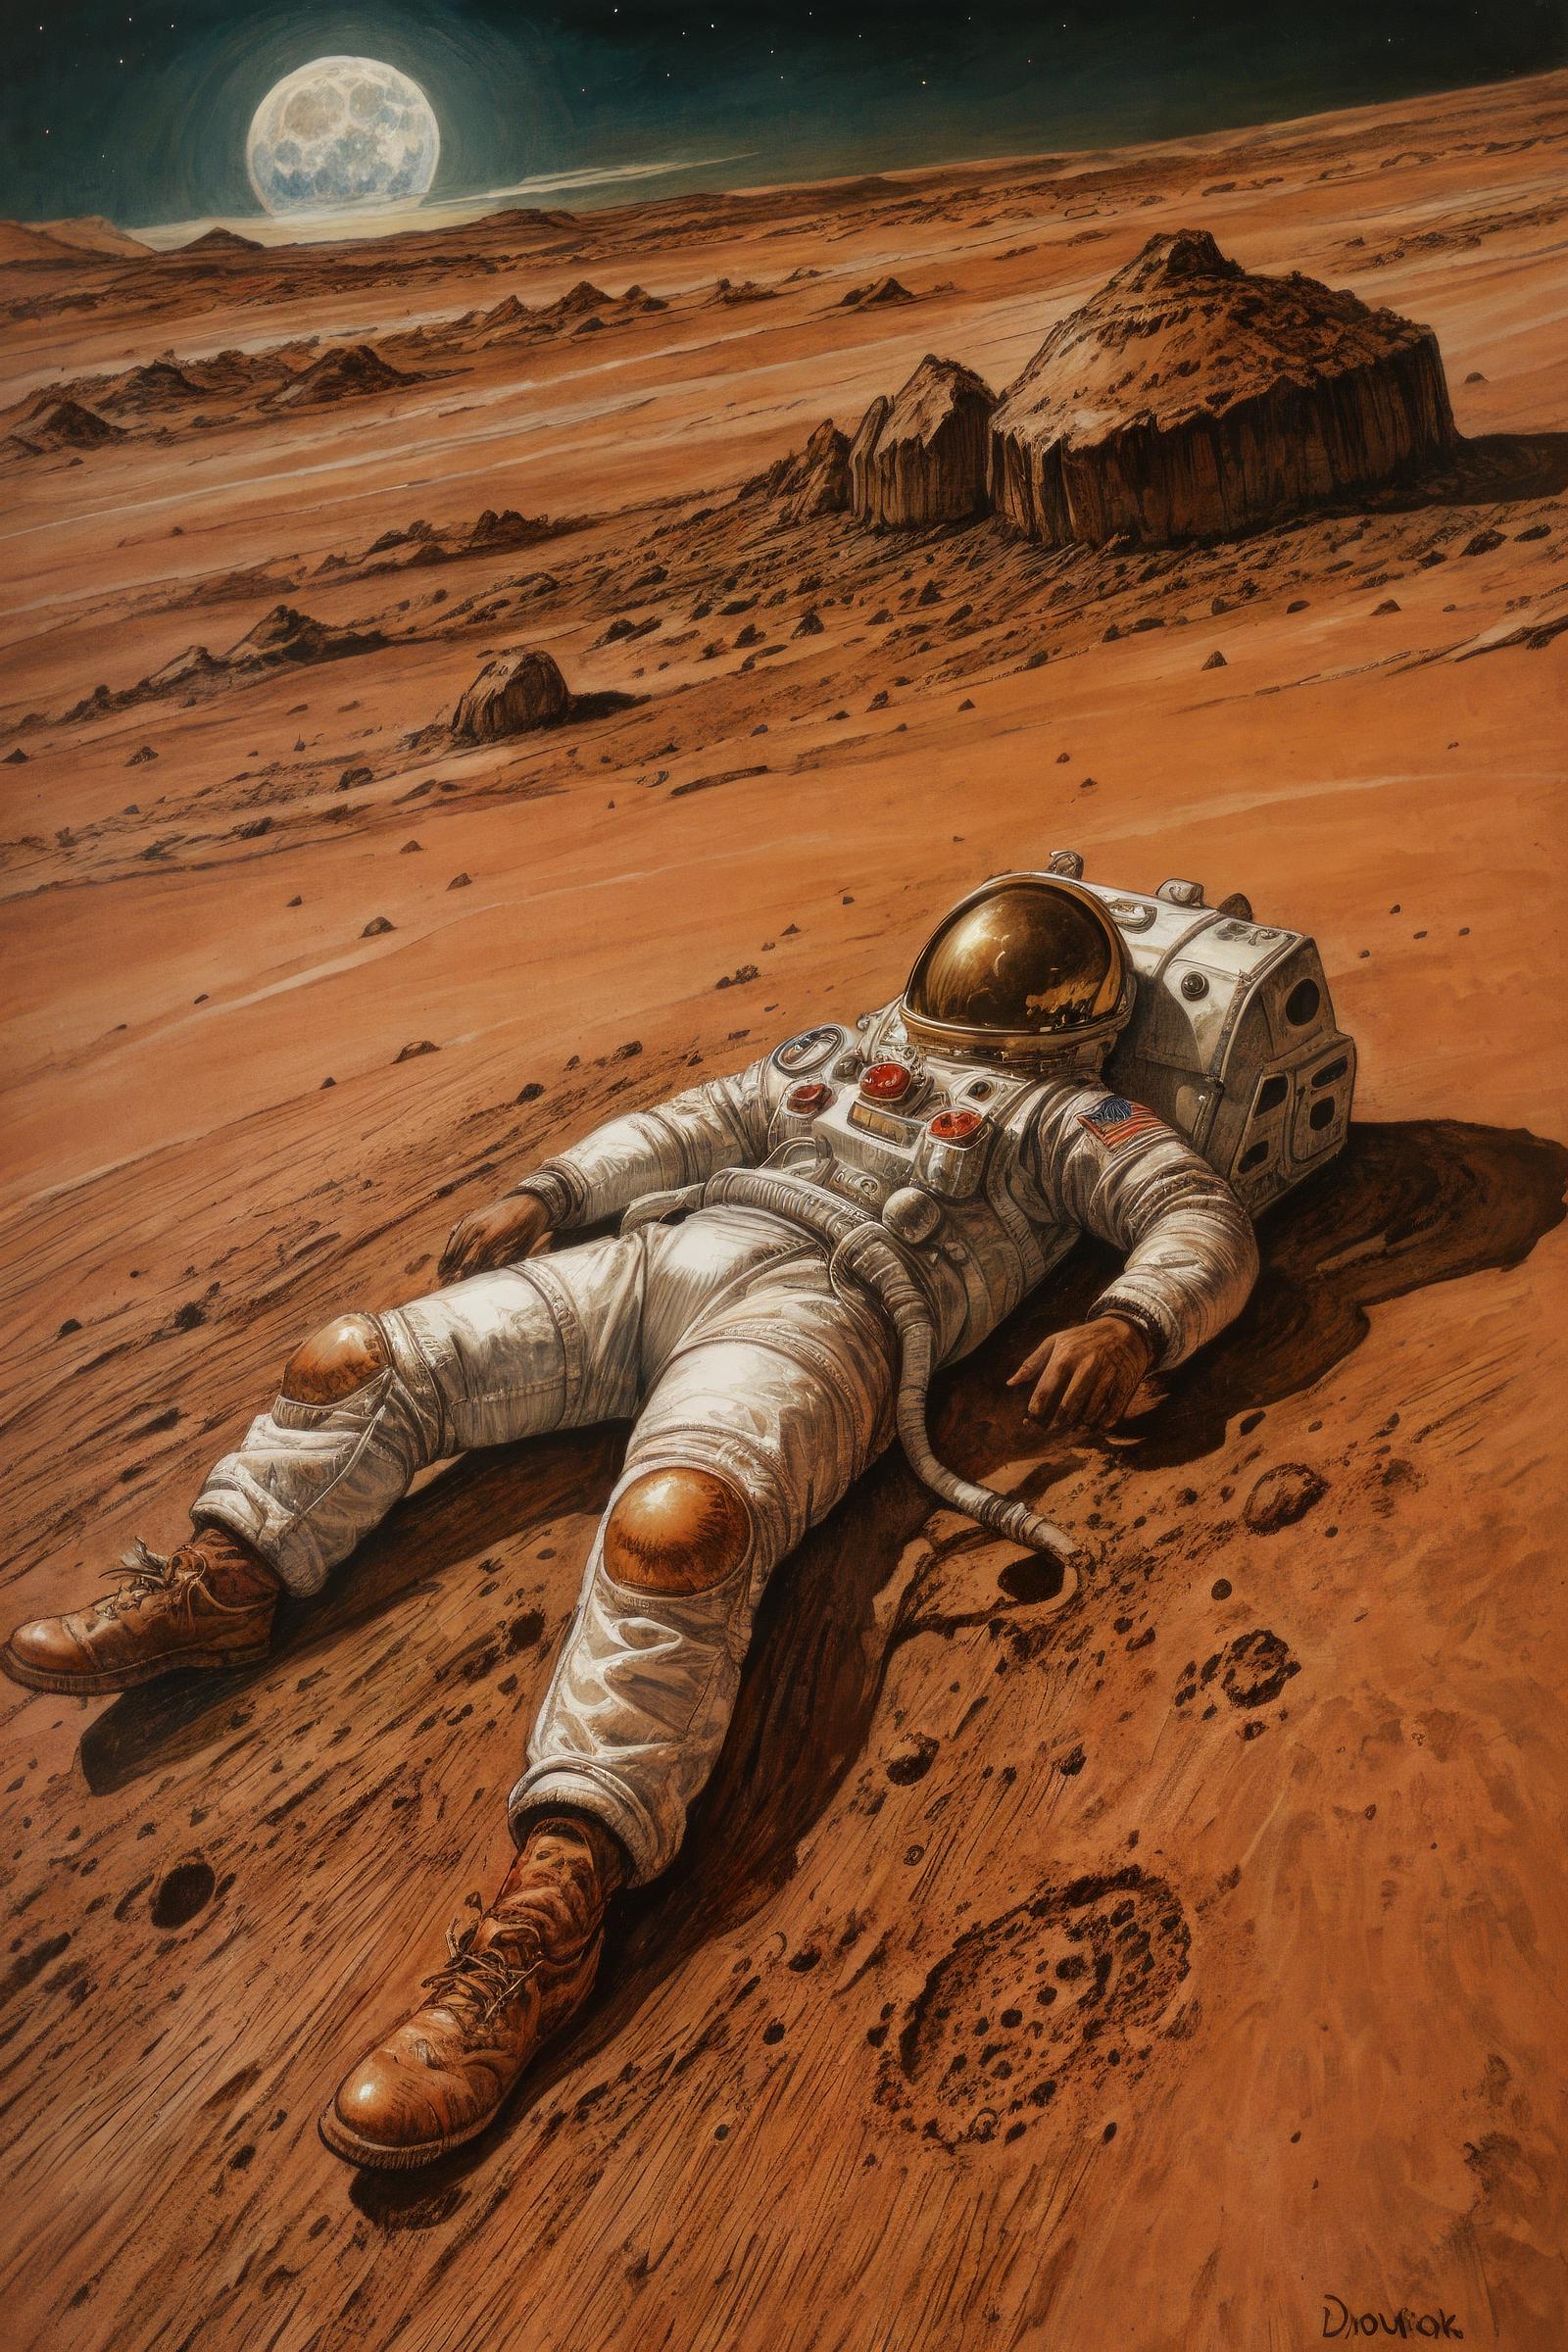 Astronaut Laying on Mars with Helmet and Backpack